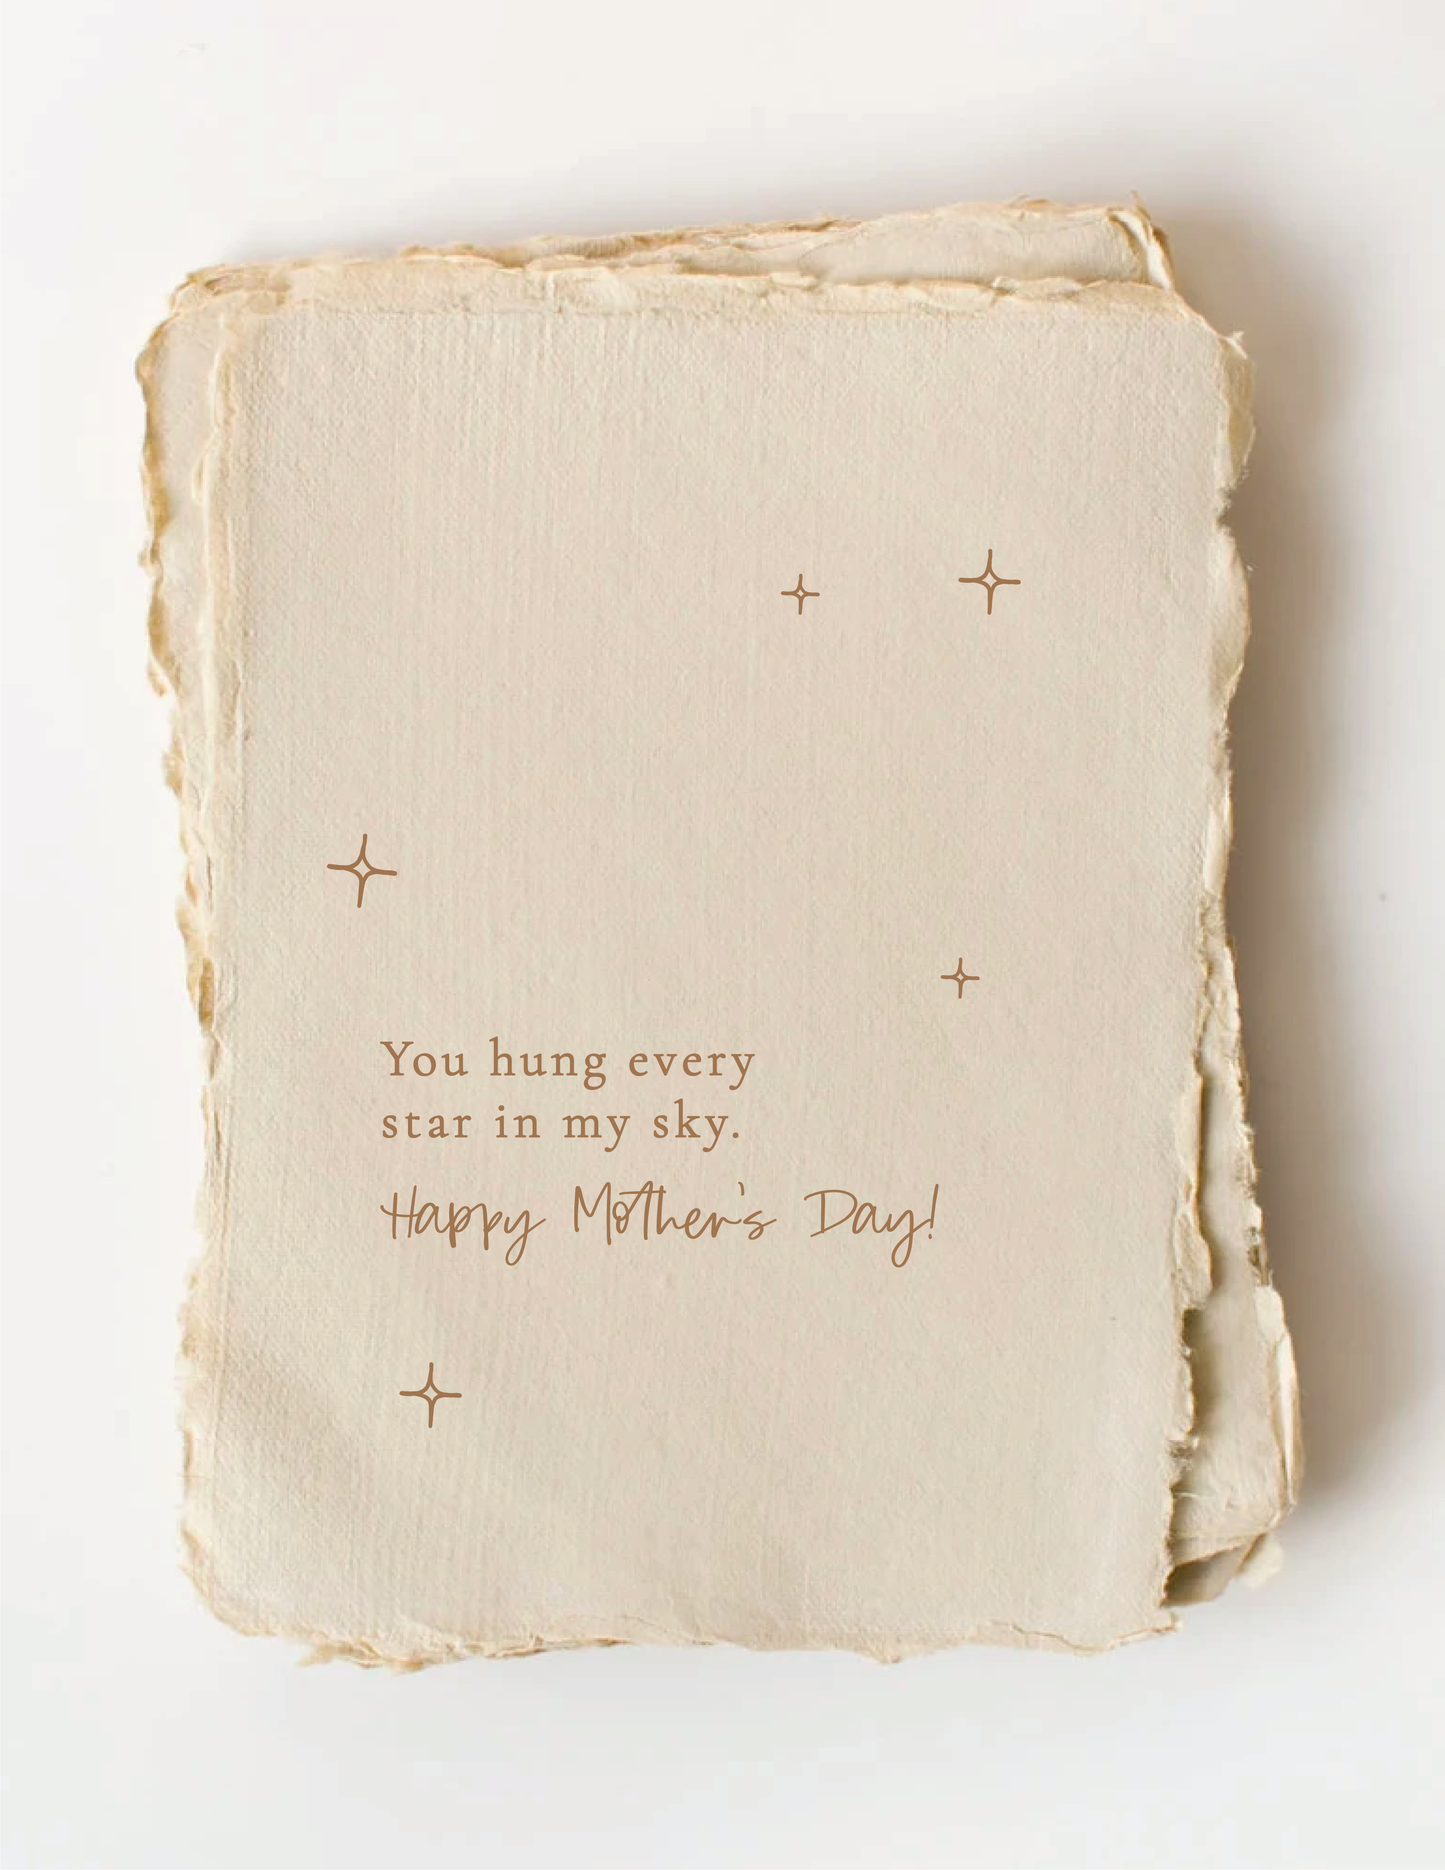 "You hung every star in my sky." Mother's Day Card